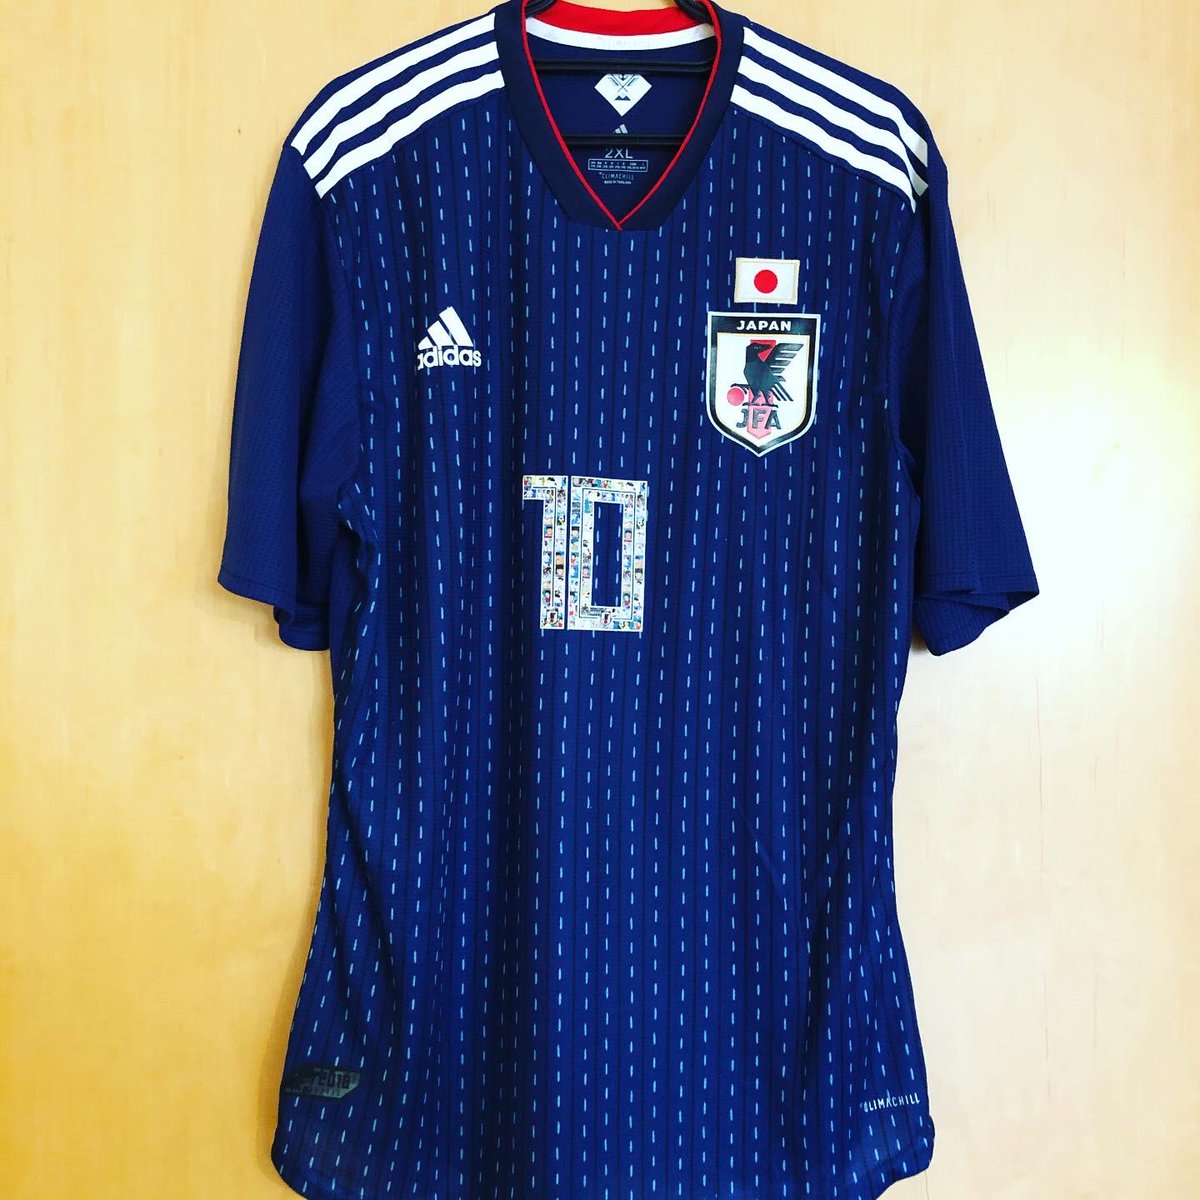  @japanfootball_a Home Kit, 2018AdidasPersonalised: キャプテン翼, 10Did anyone say international break? This (fake) replica of Japan’s 2018 World Cup shirt celebrates popular manga series “Captain Tsubasa”. The pretty cool numbering contains stills from the cartoon.